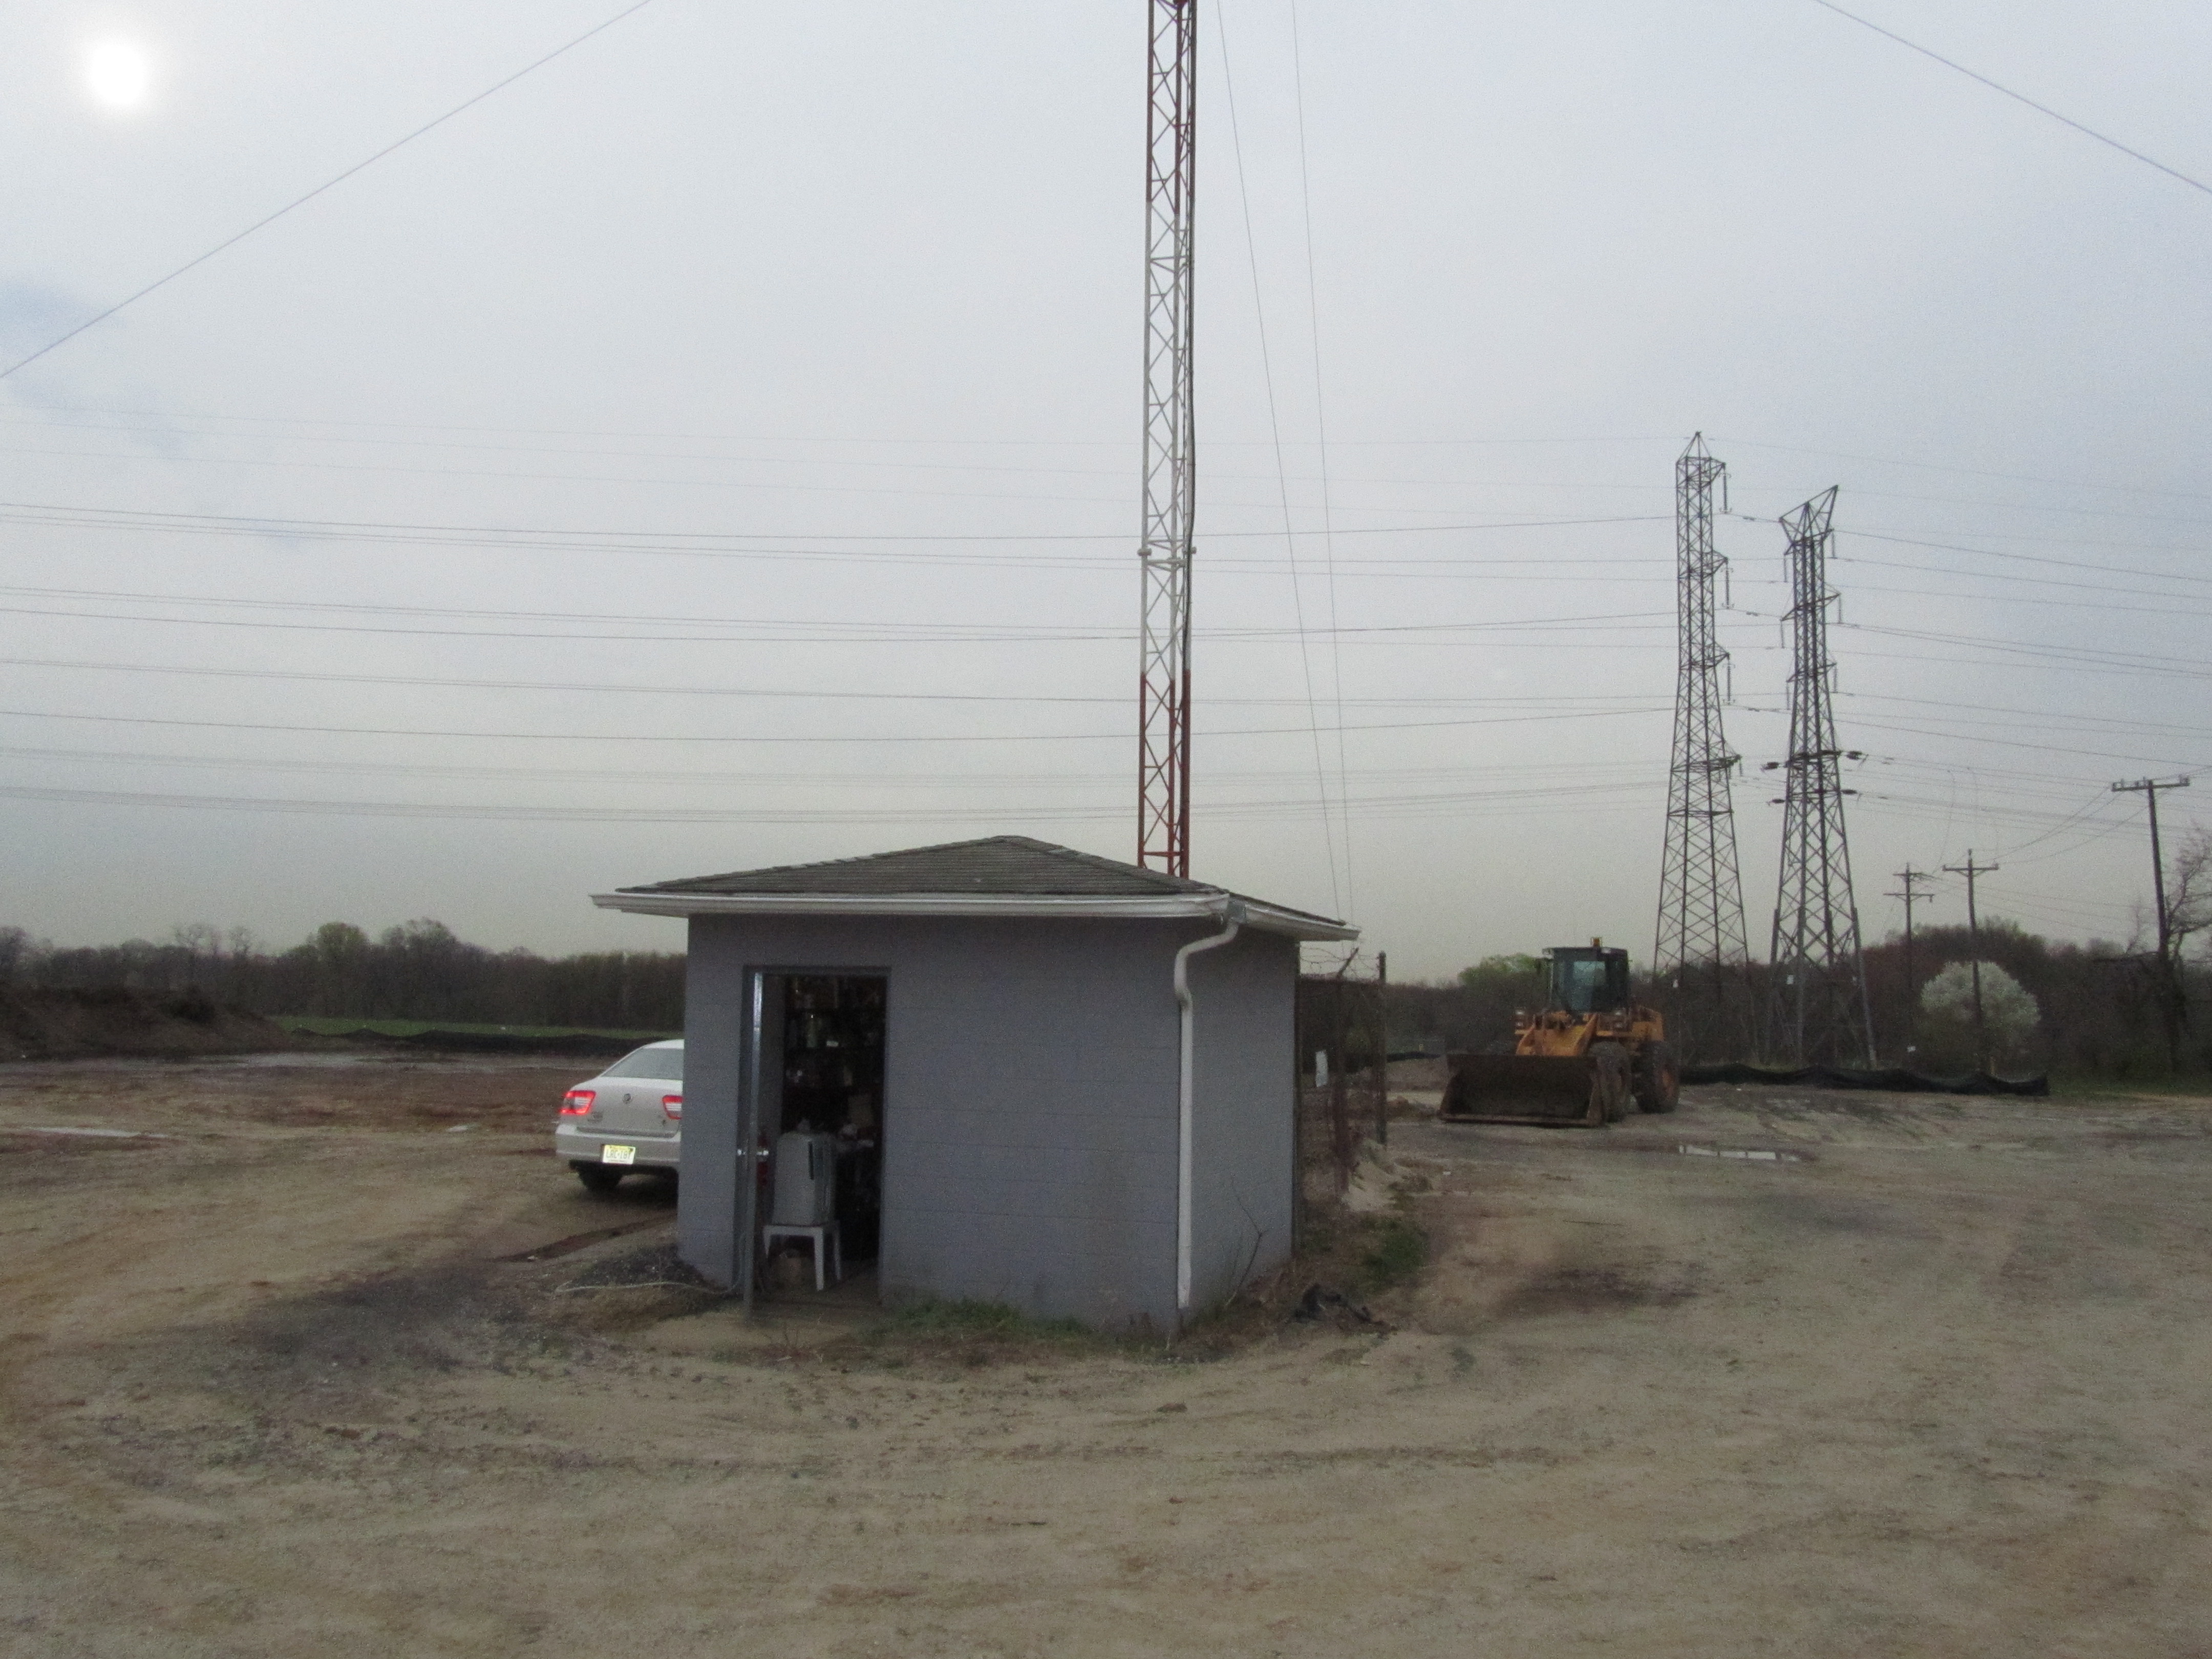 2010 - The Transmitter Building, before RU put the signs up.